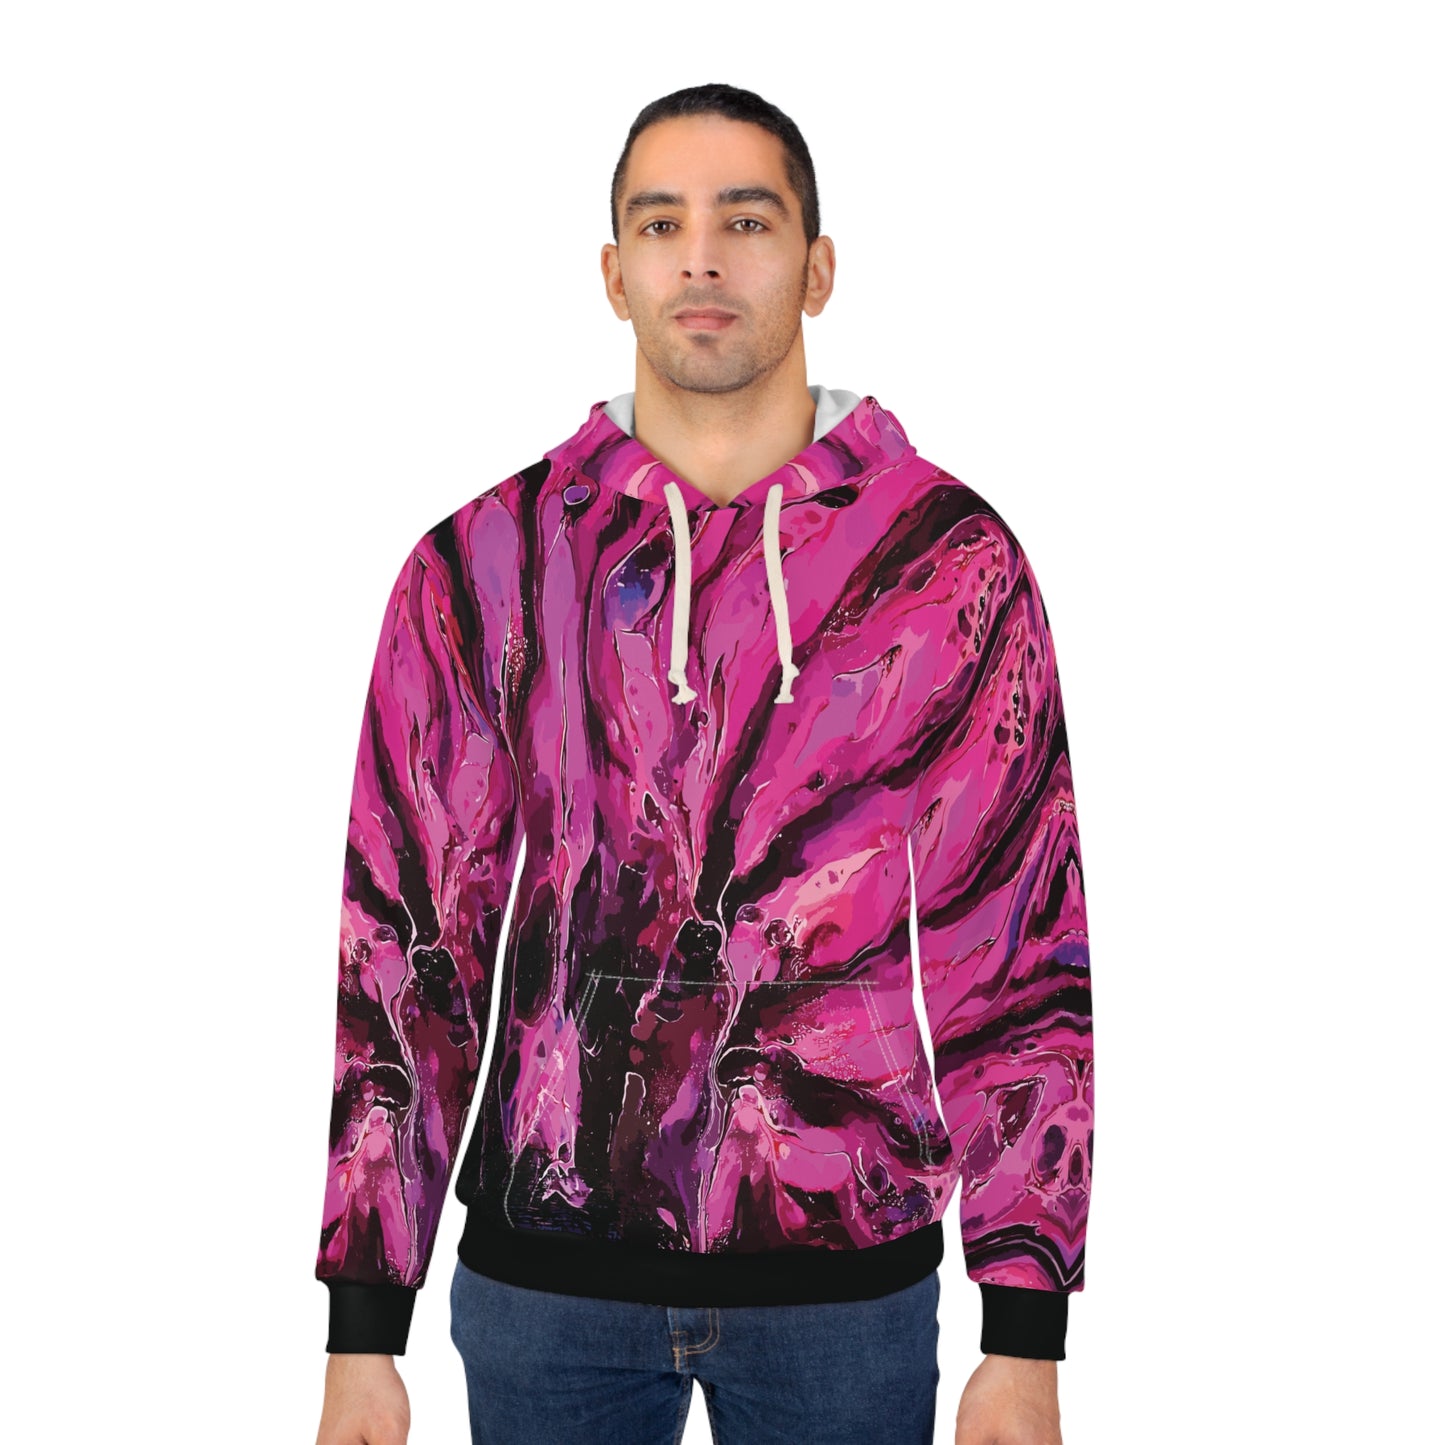 Floral Flare: All-Over Print Unisex Pullover Hoodie